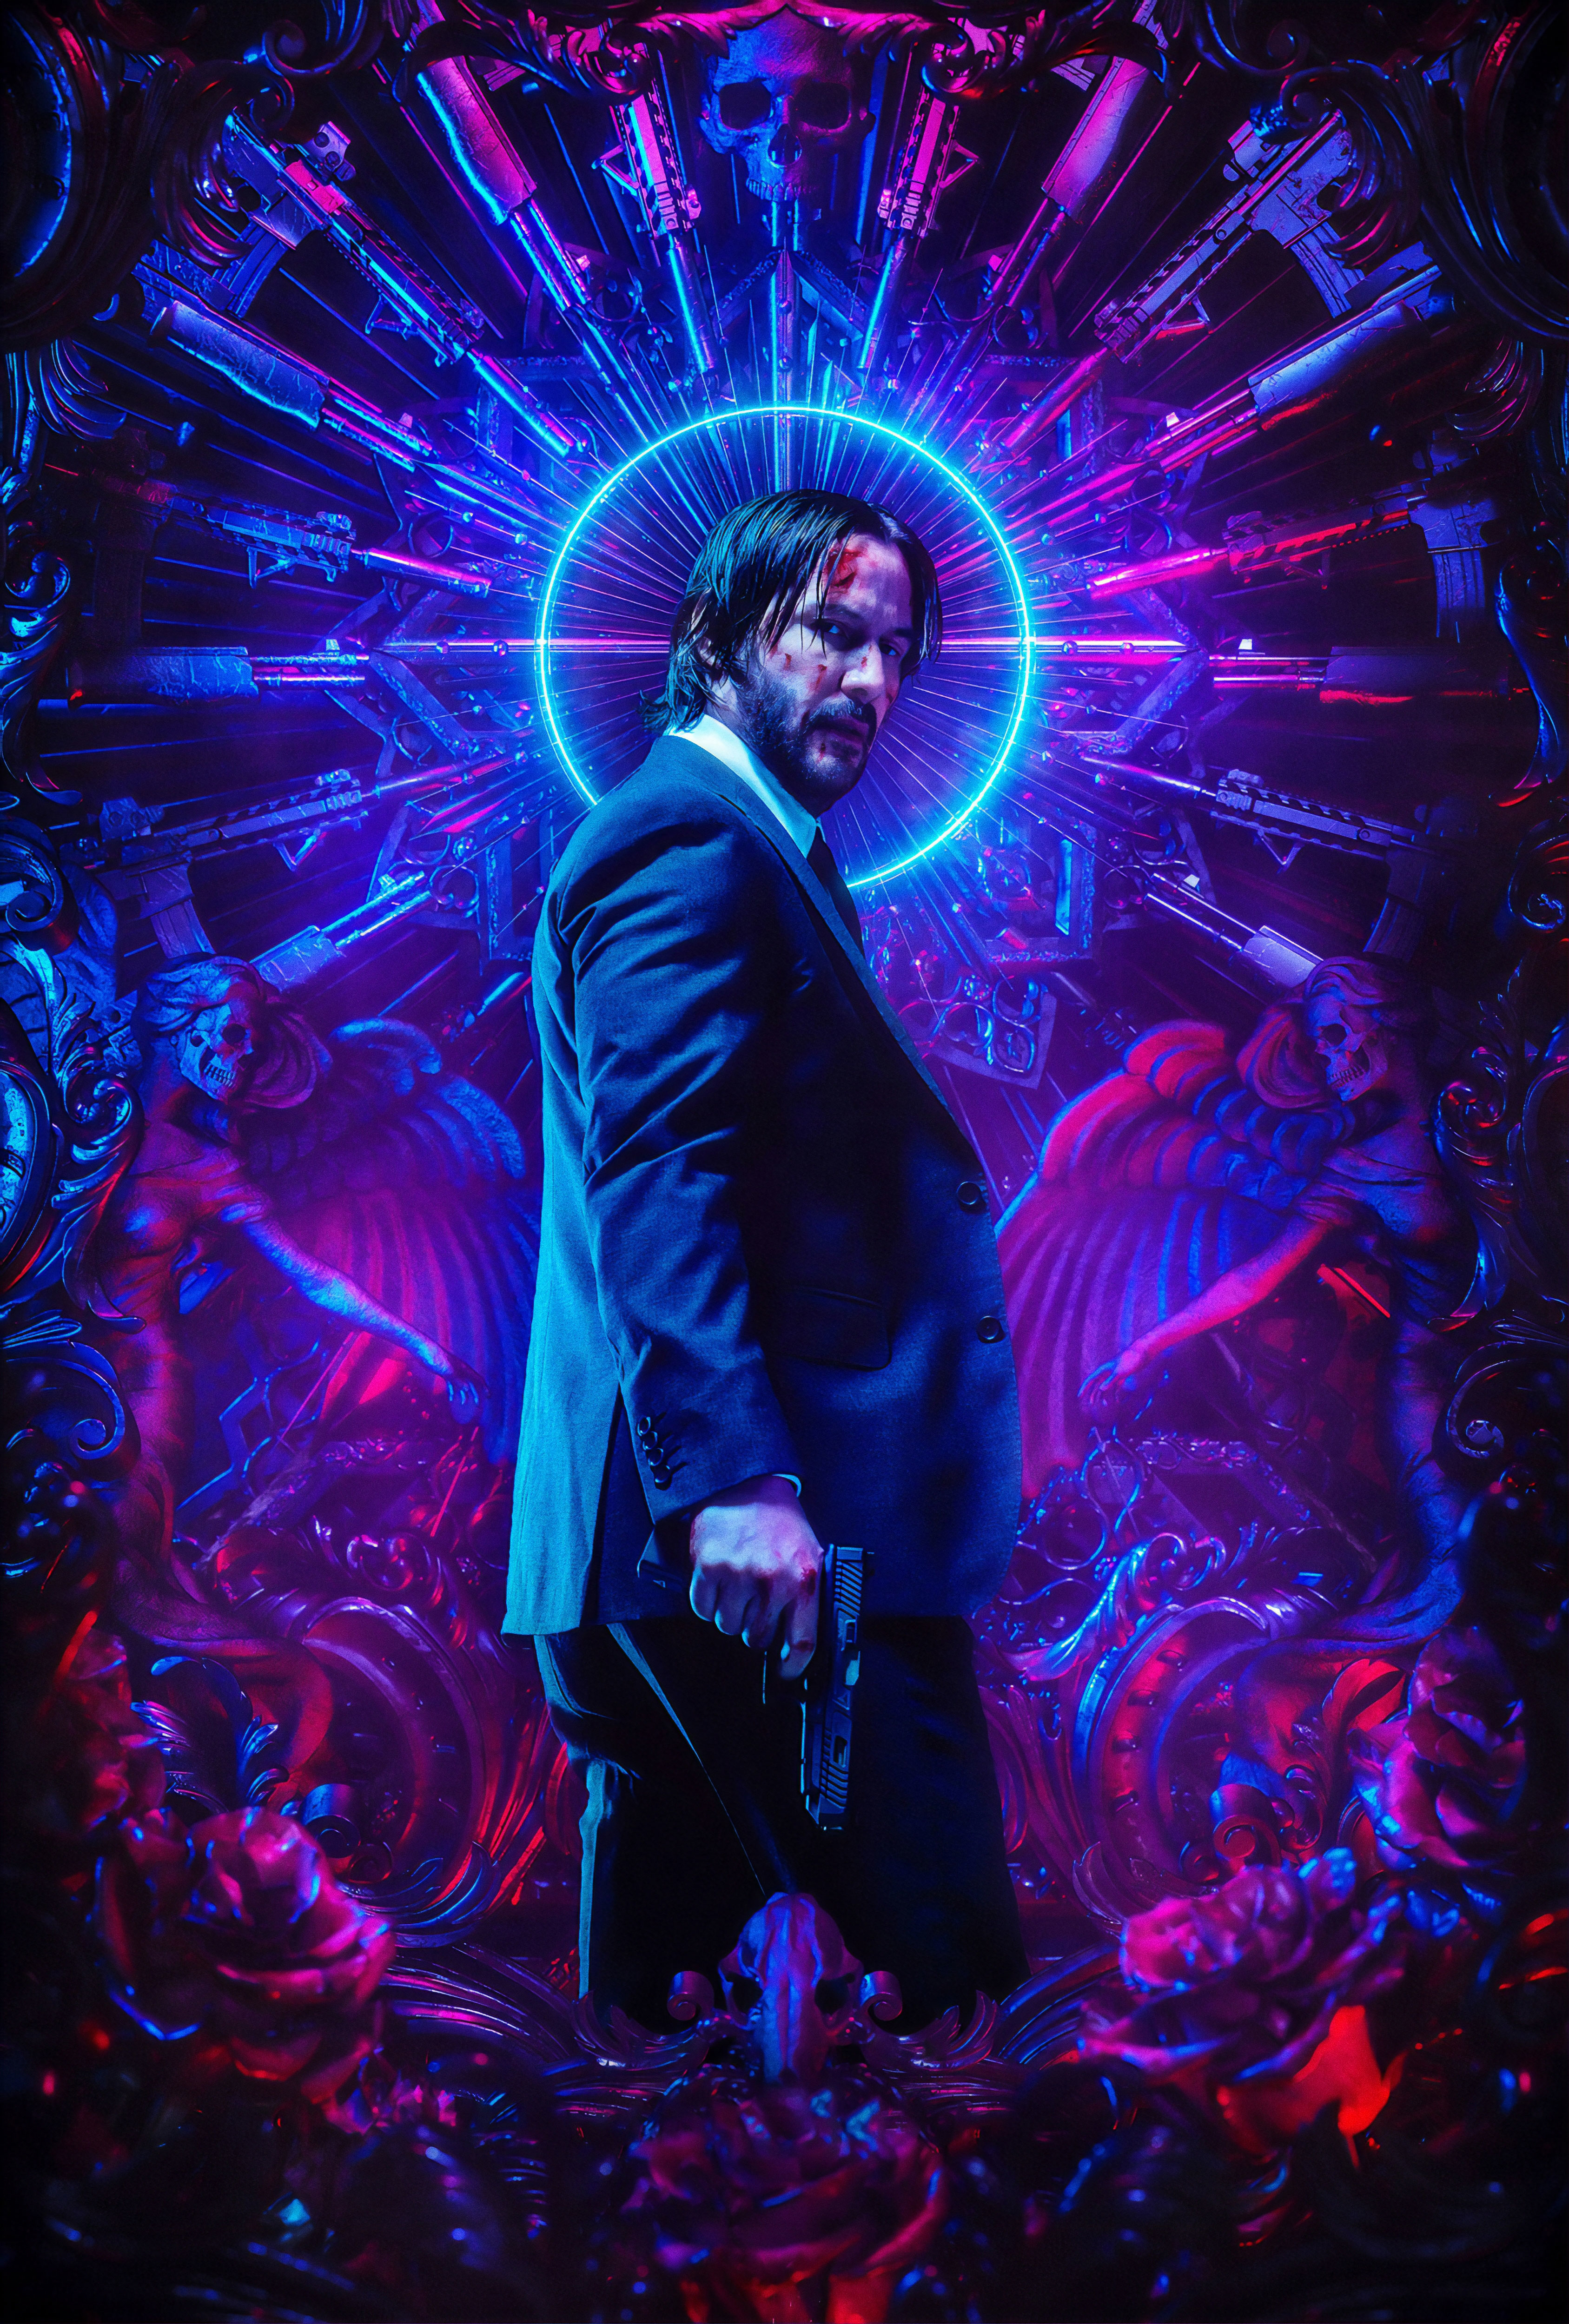 Poster Of John Wick 3 Wallpaper, HD Movies 4K Wallpapers, Images